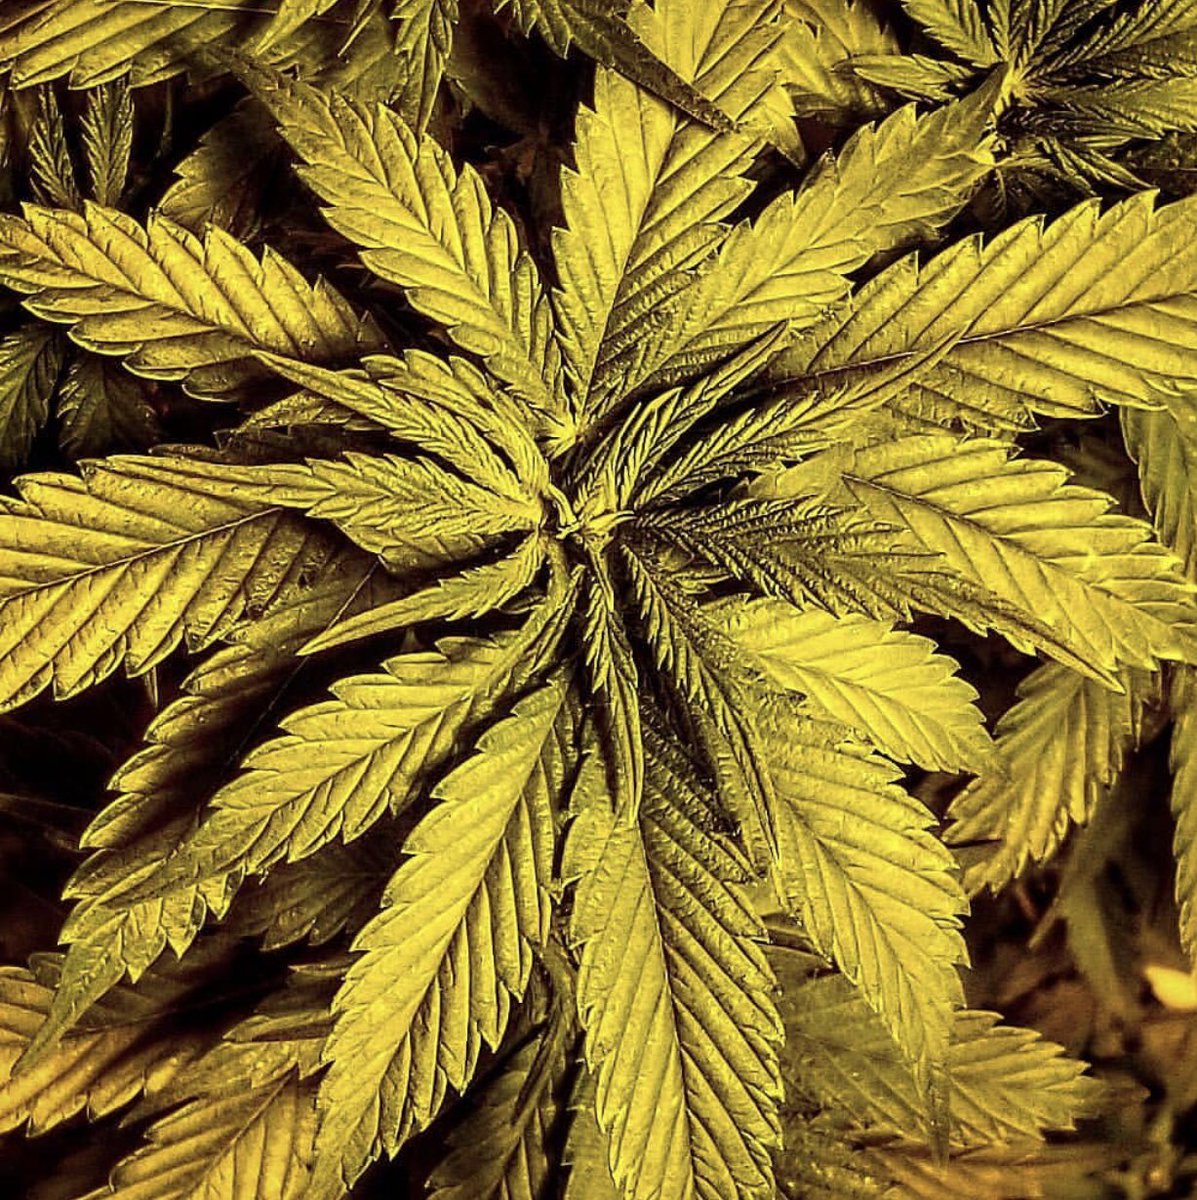 Just some of our beautiful foliage for you guys to get your eyes on 👀 #RDO #RedDirtOrganics #beautiful #organicmedicine #happyplants #oklahoma #788 #canna #cannapages